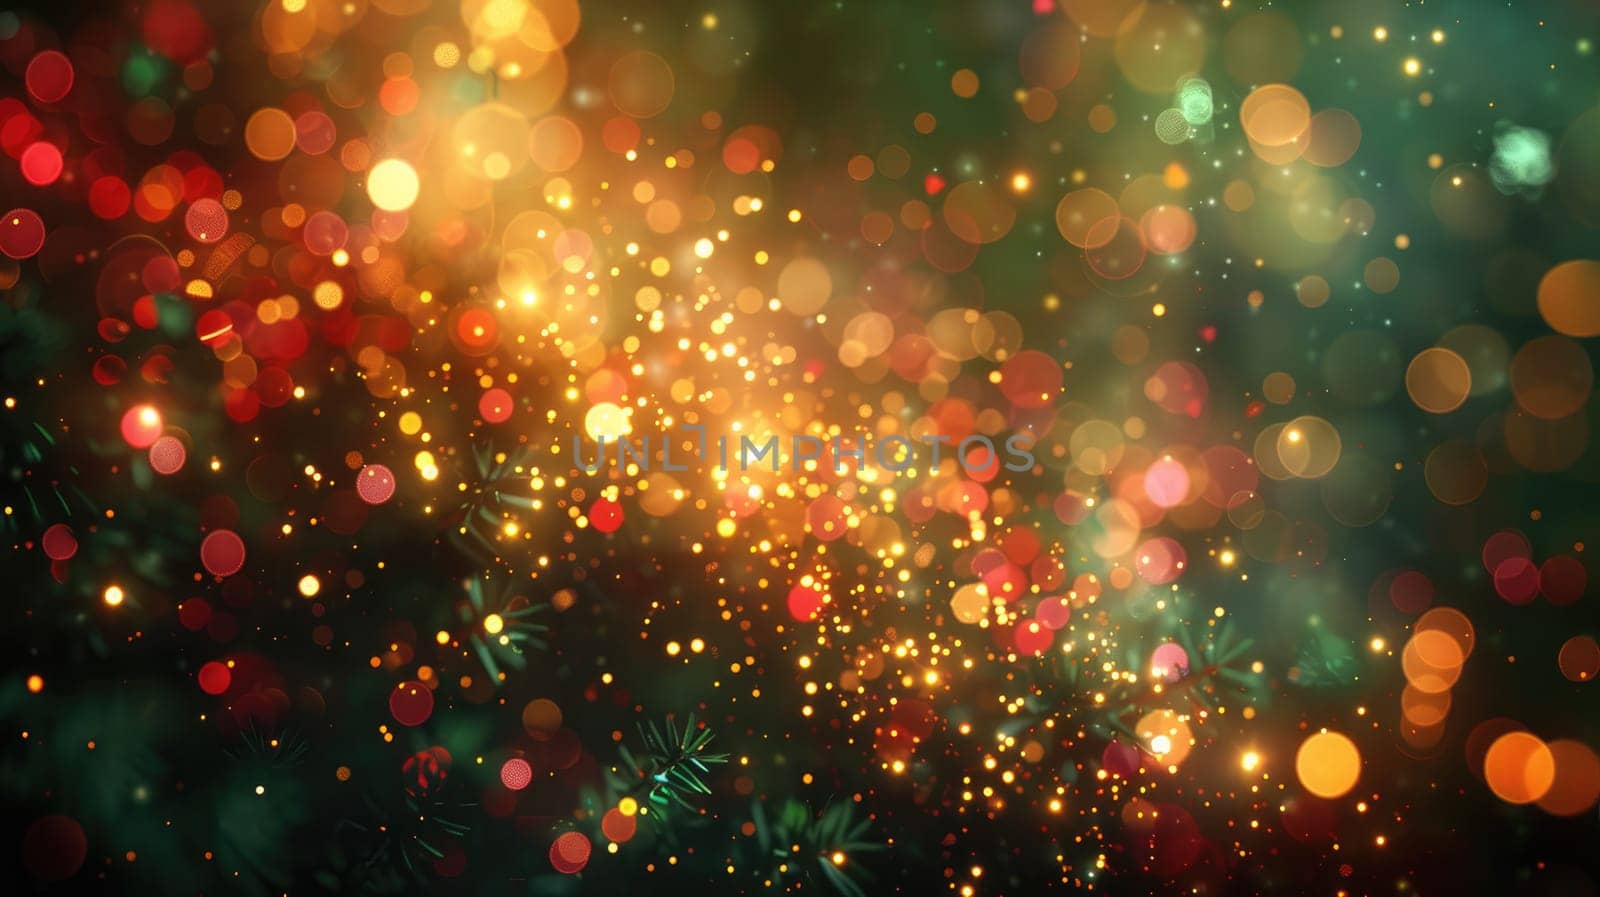 Glowing Friendship Day Bokeh Lights in Warm Festive Colors of Gold, Red, and Green on Dark Background..